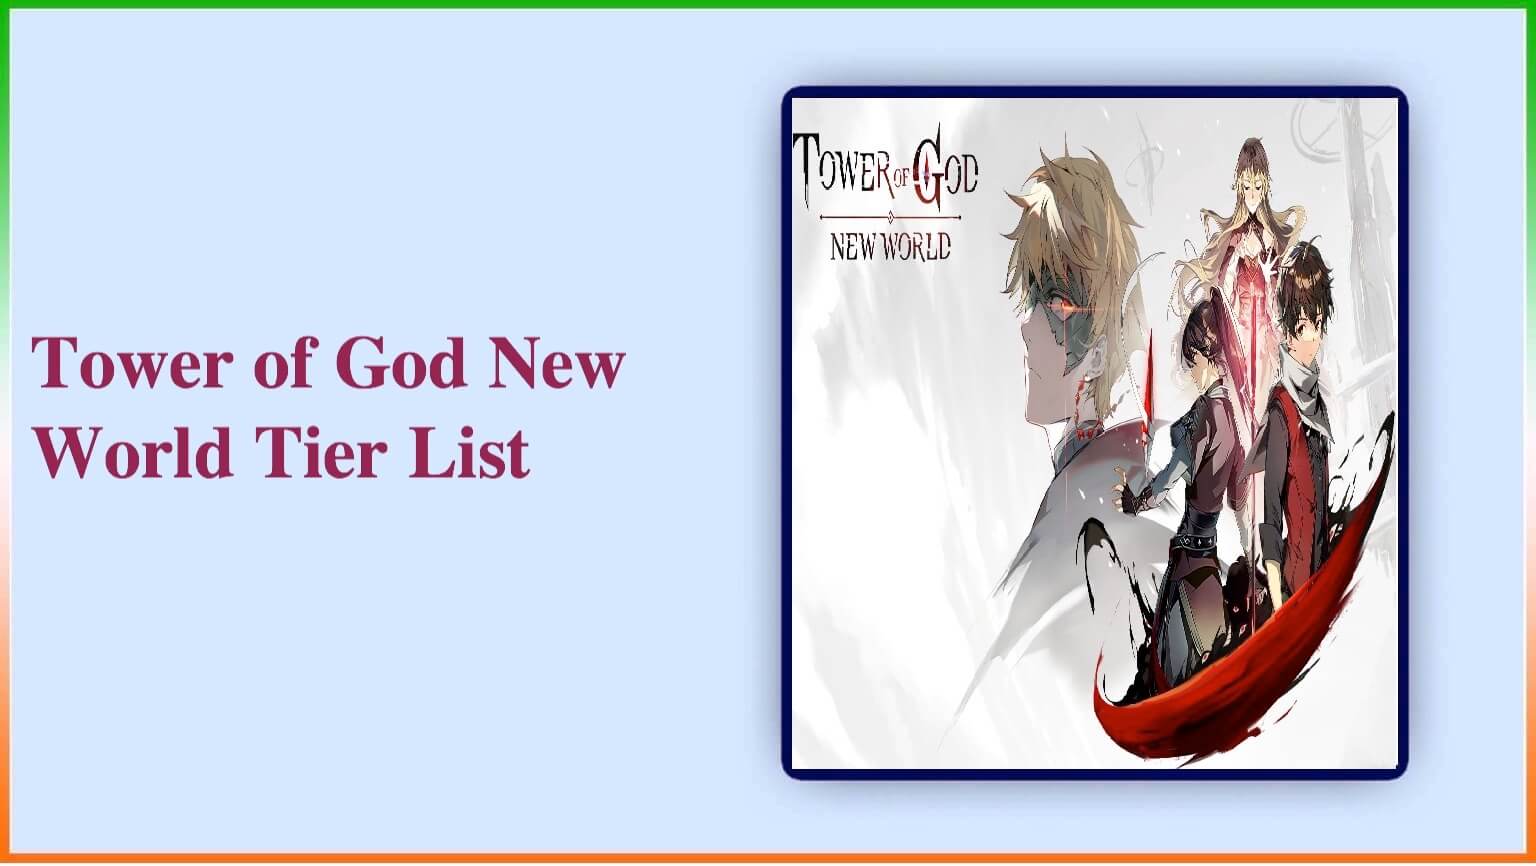 Tower of God: New World Tier List and Reroll Guide with LDPlayer 9